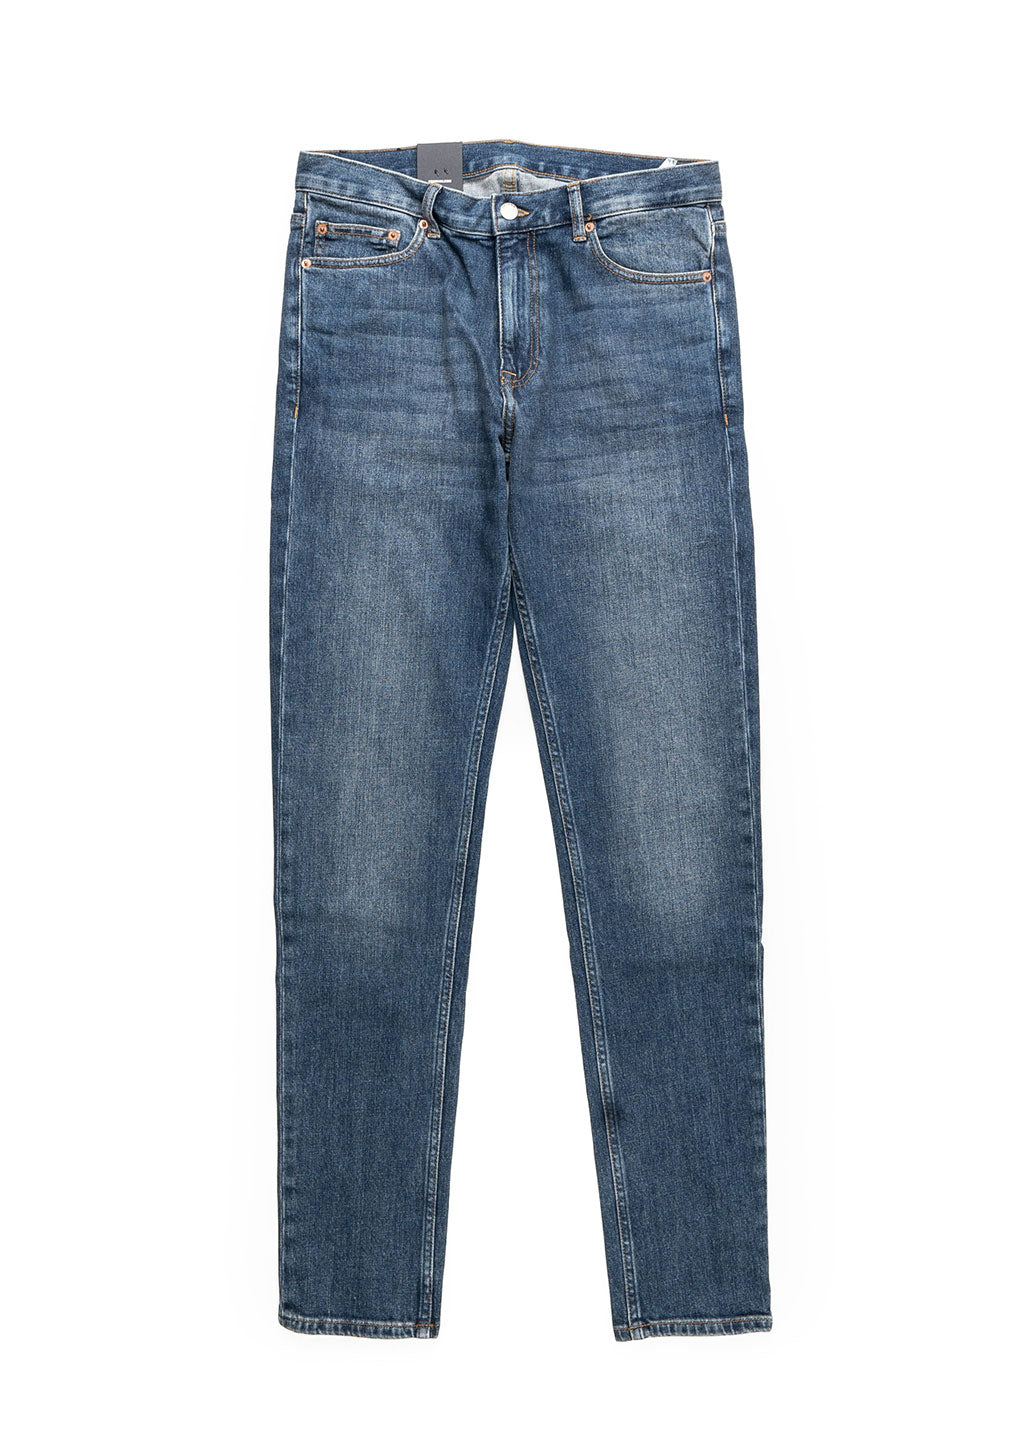 Levi's - Ribcage Straight Ankle - Fall Trip